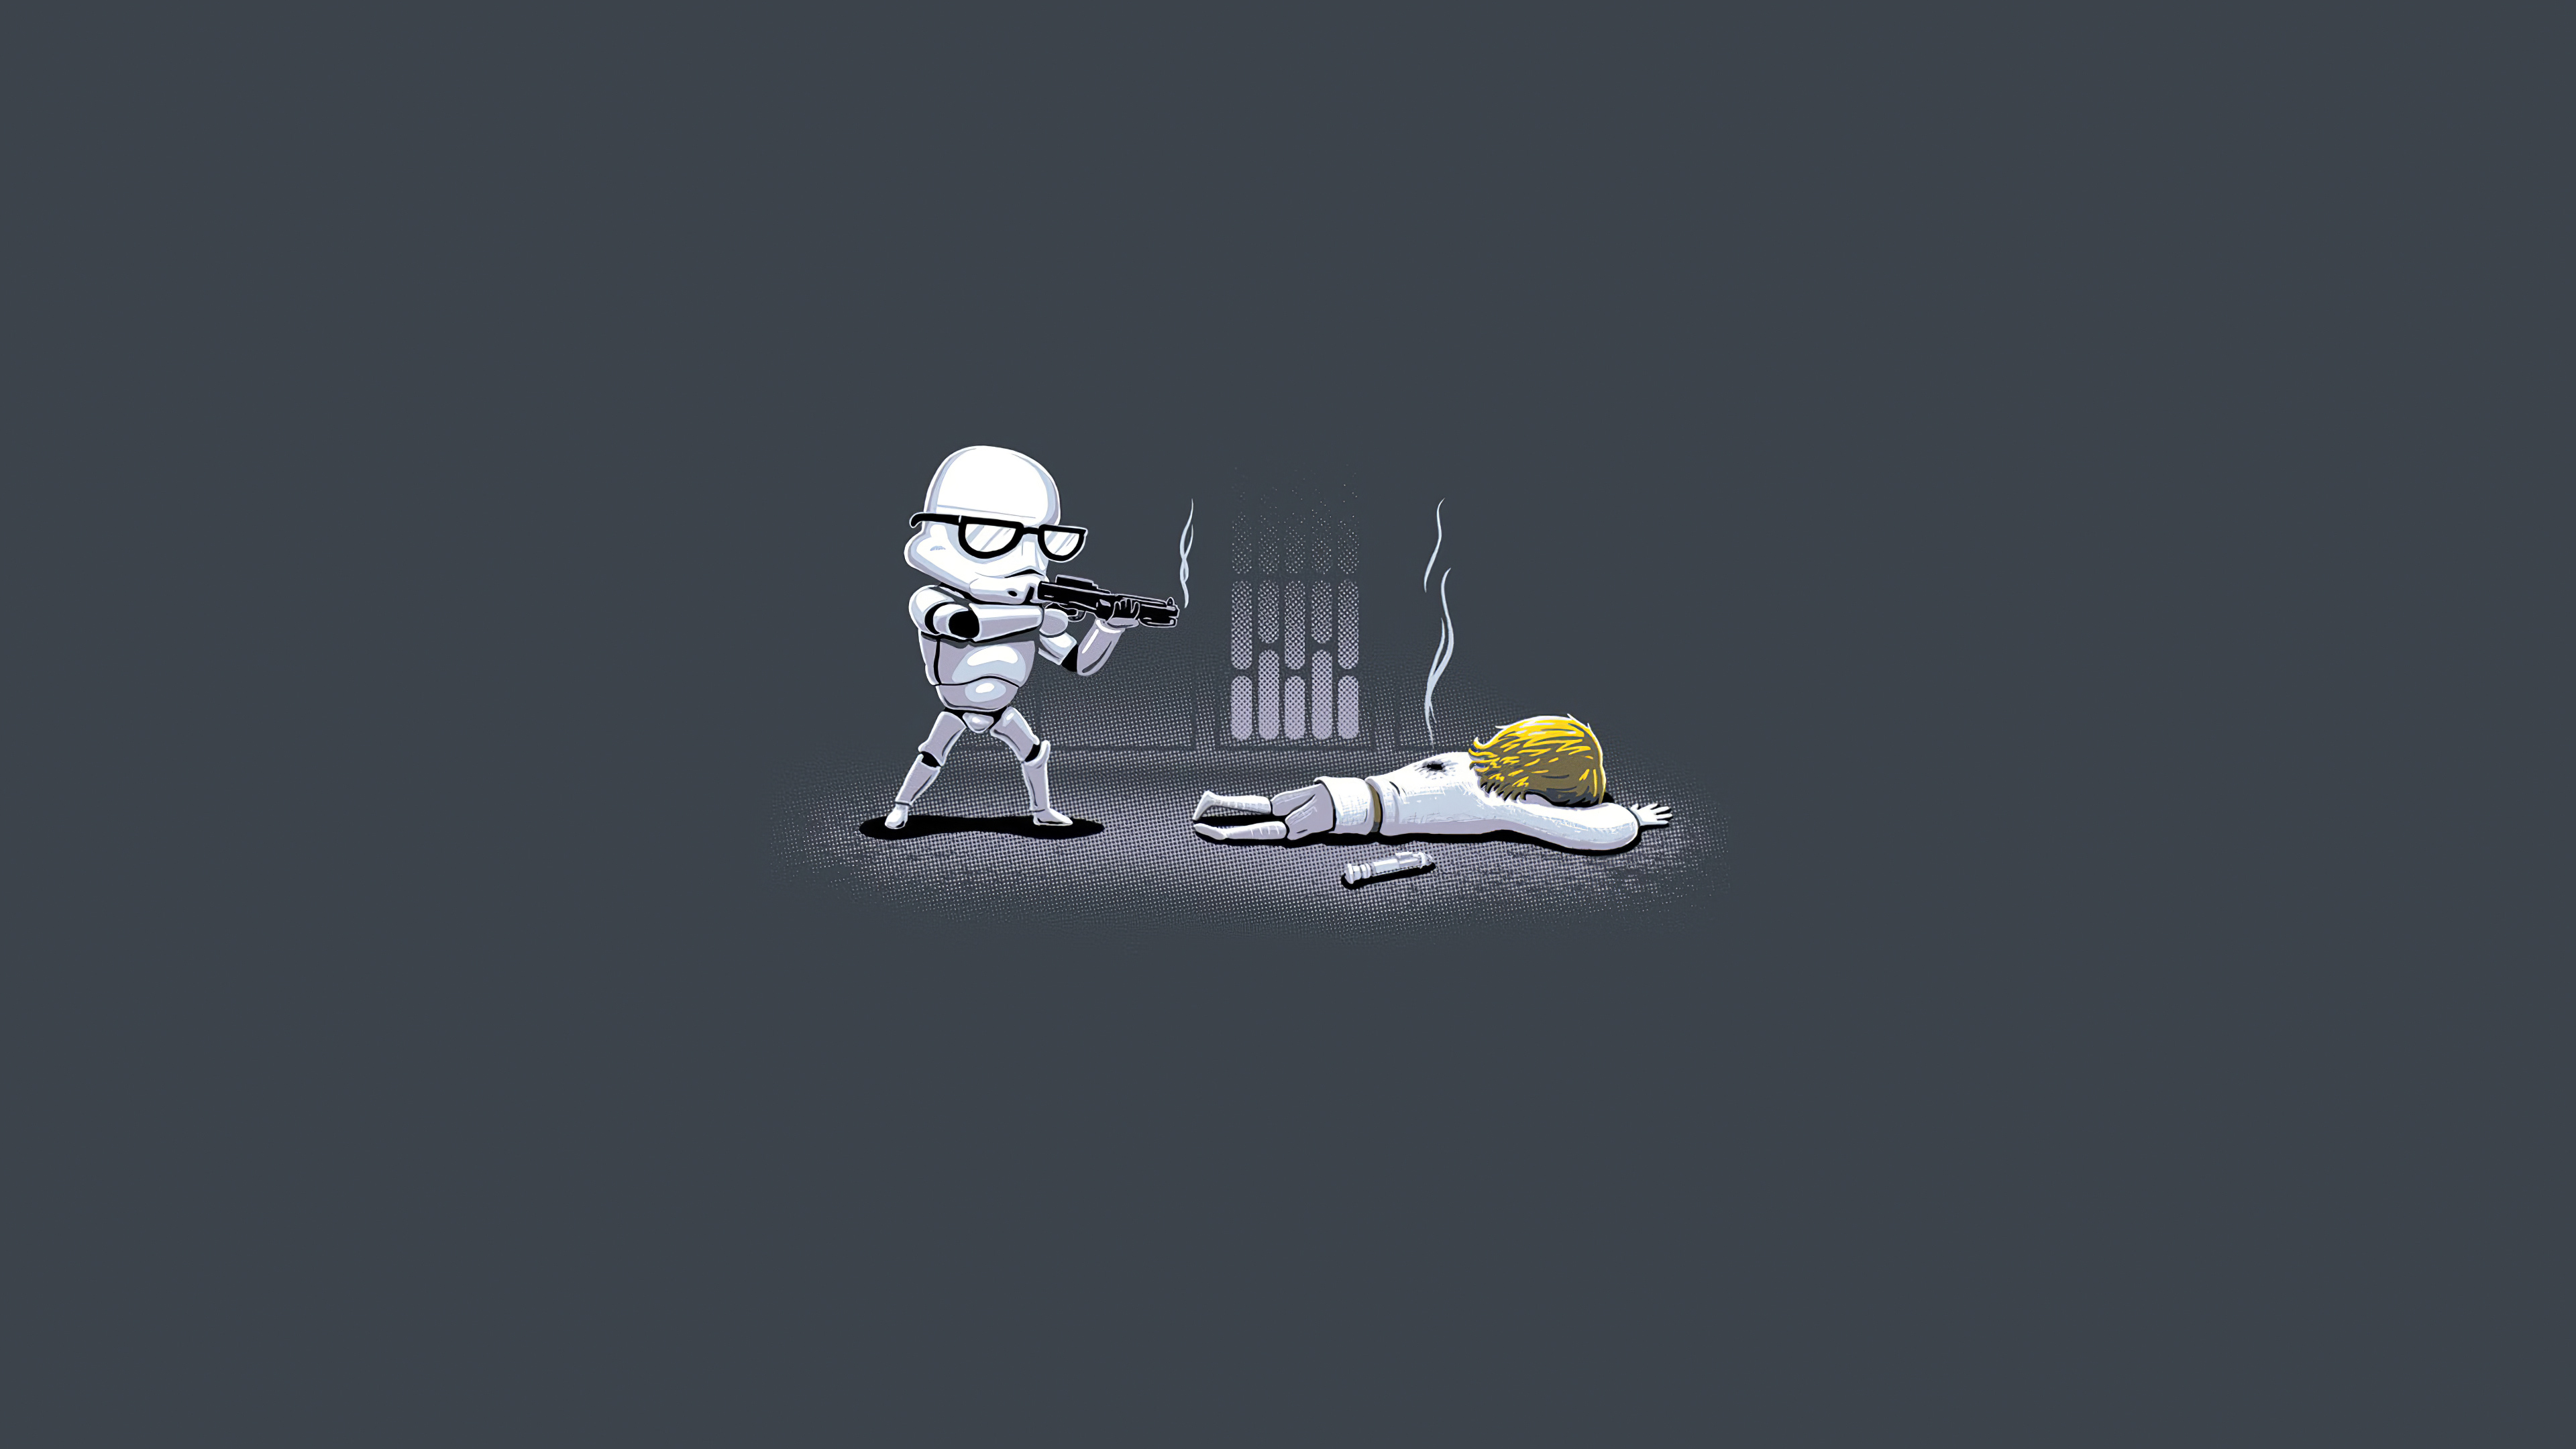 Star Wars Stormtrooper Minimal 4k Hd Artist 4k Wallpapers Images Backgrounds Photos And Pictures